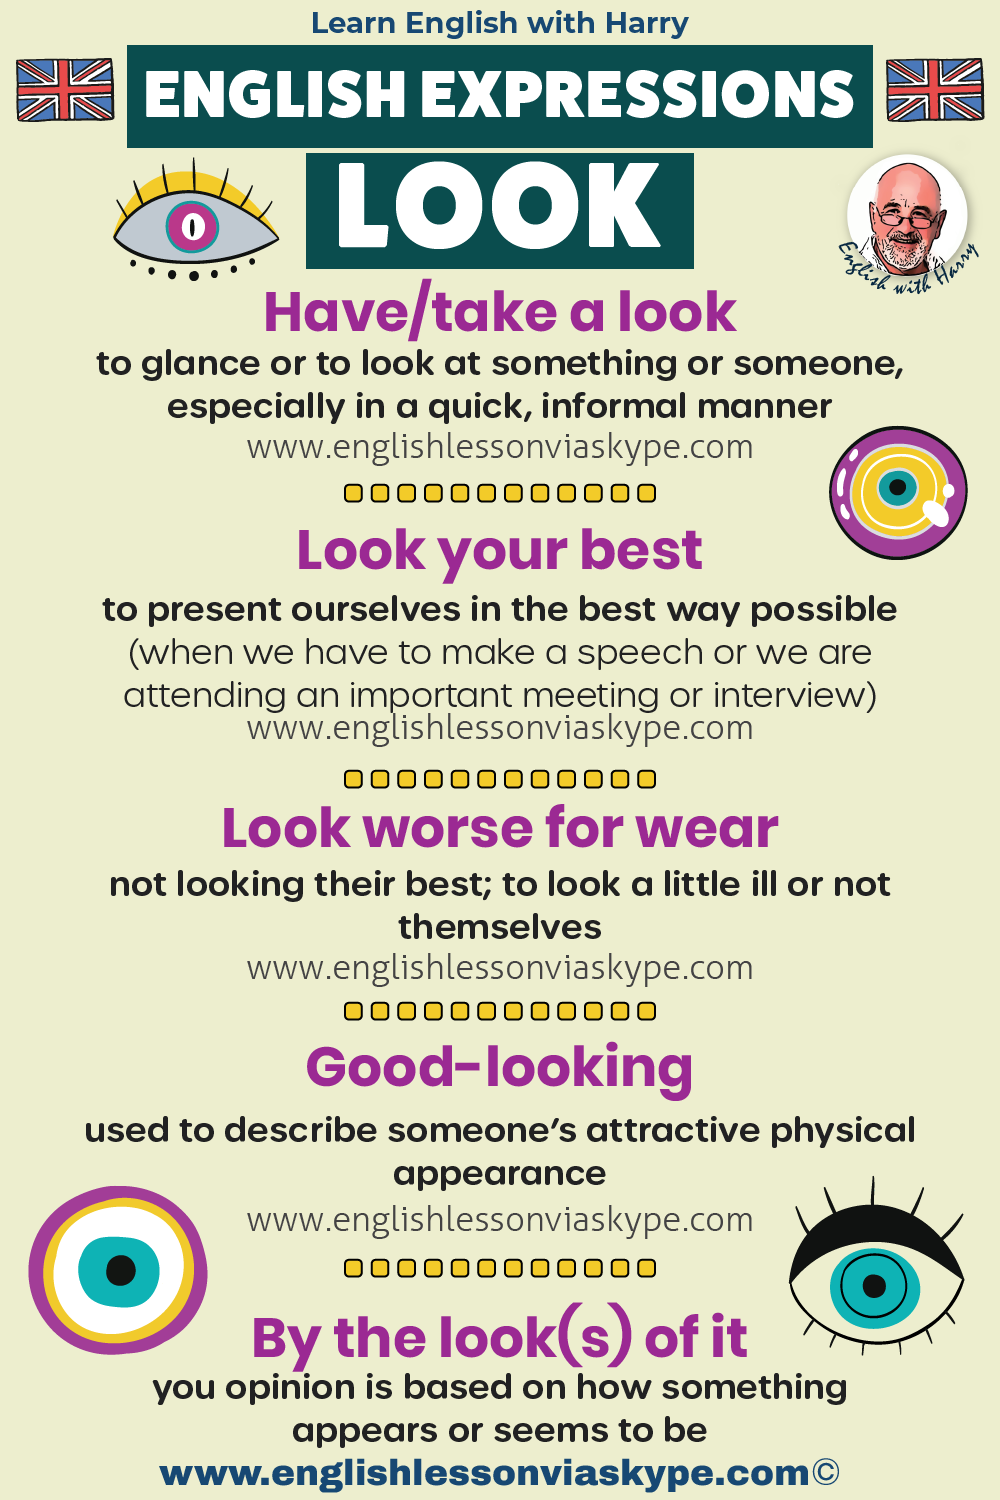 English expressions with Look. Advanced English learning. English lessons on Zoom at www.englishlessonviaskype.com #learnenglish #englishlessons #EnglishTeacher #vocabulary #ingles